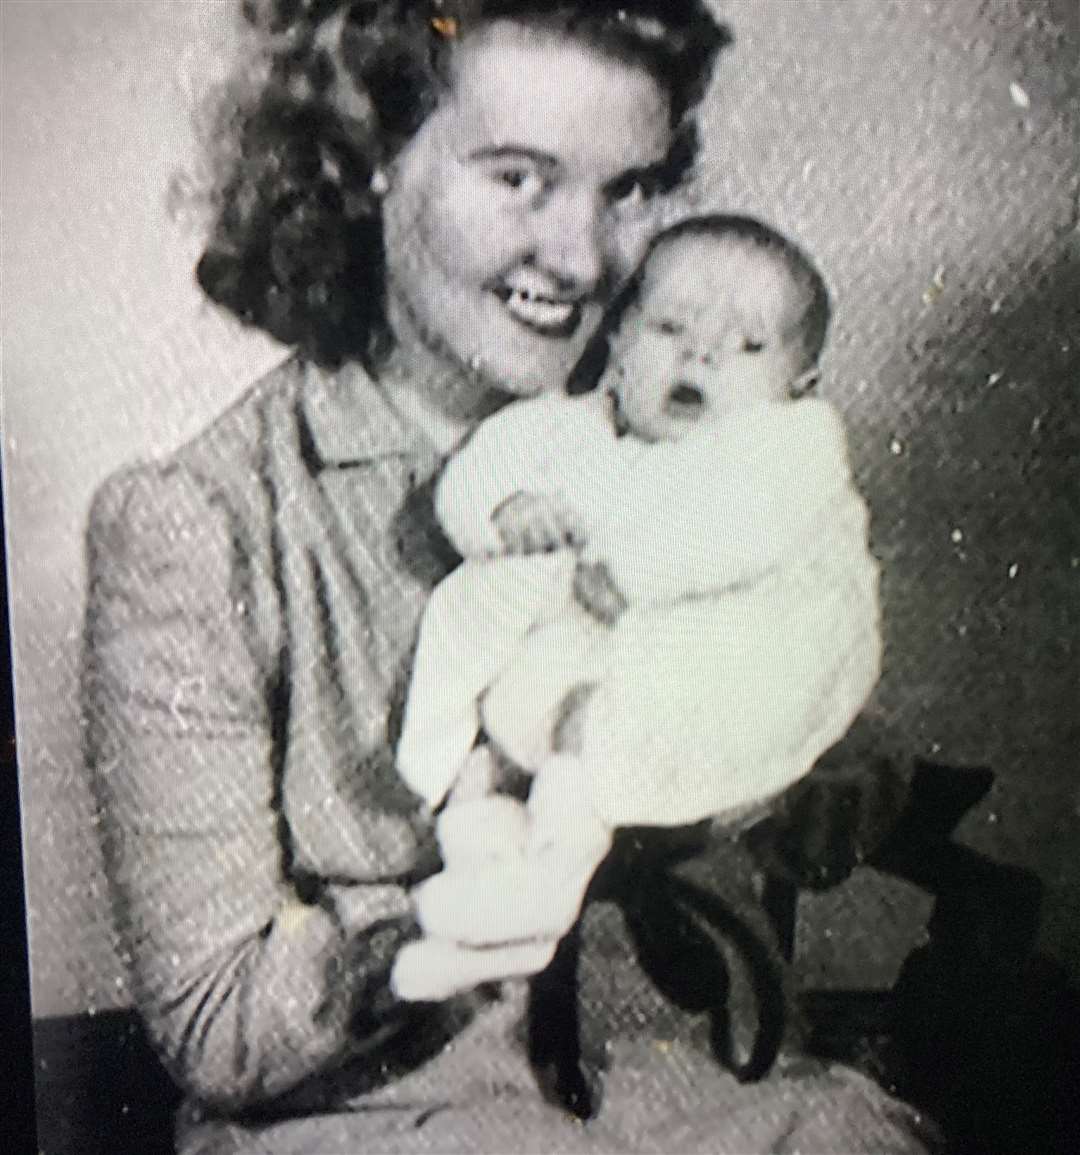 Michael Crawford as a baby with his mum Doris. Picture used in Channel 5 TV documentary